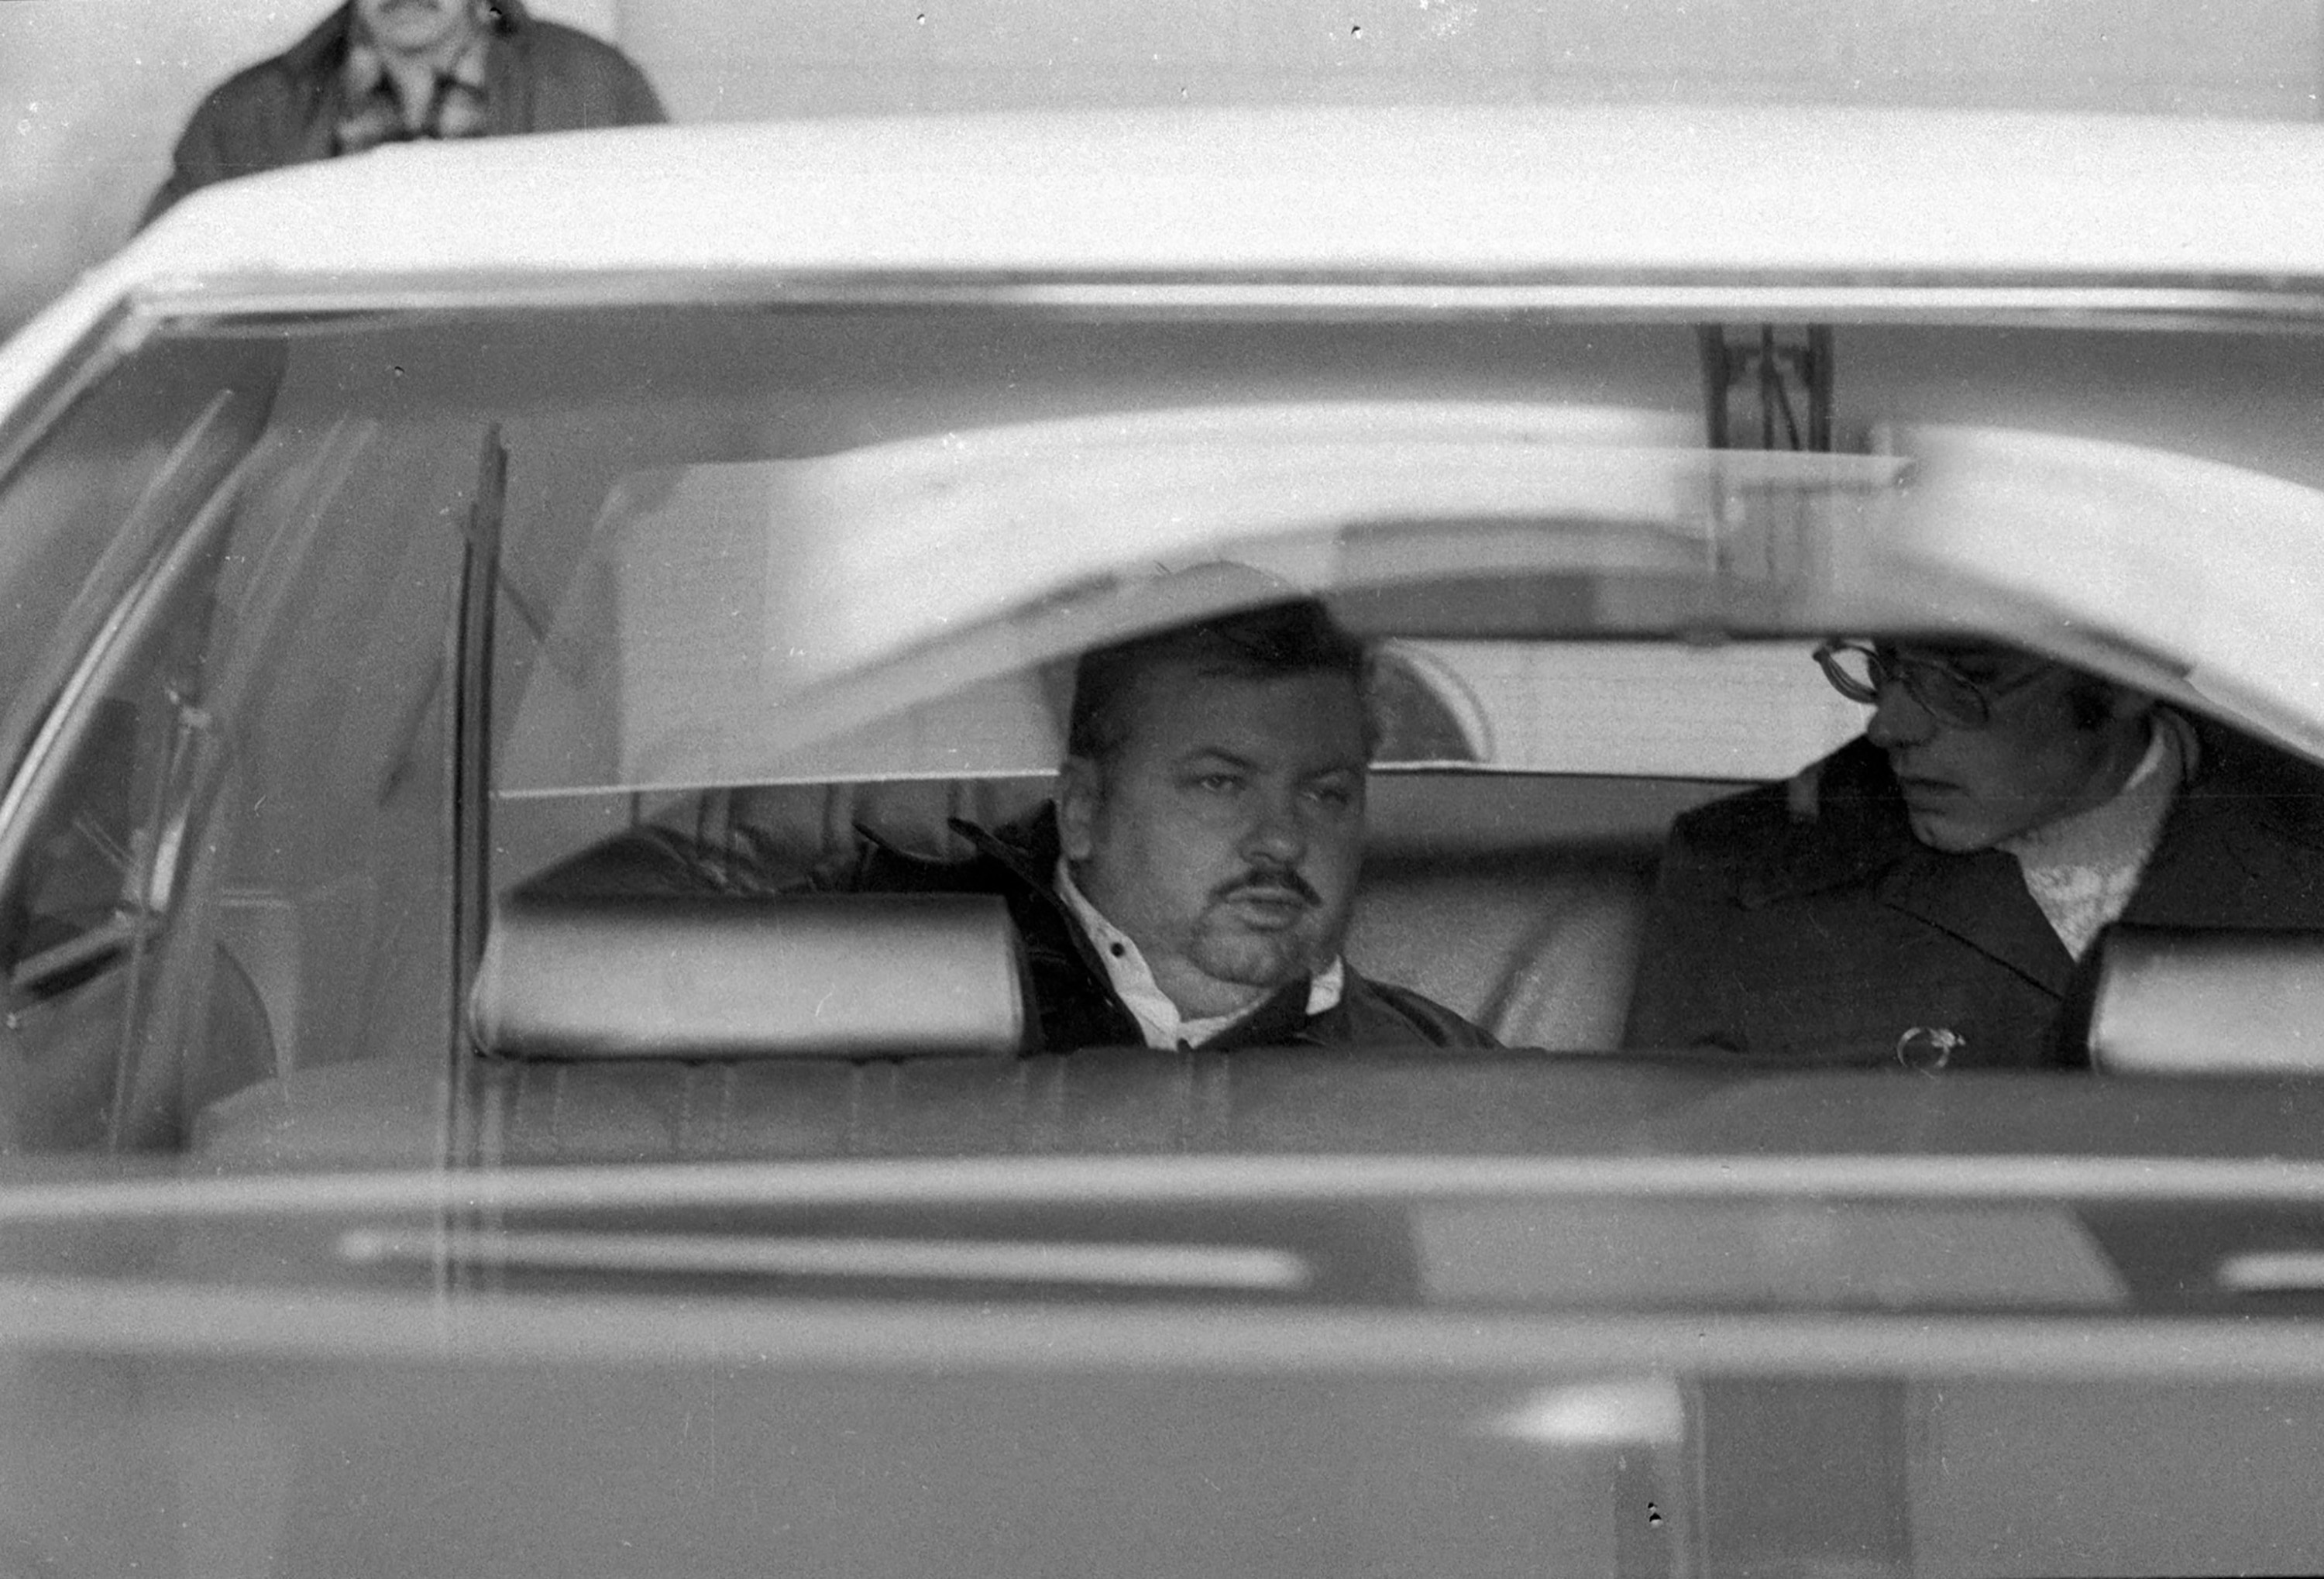 John Wayne Gacy photographed in a car on December 23, 1978. | Source: Getty Images